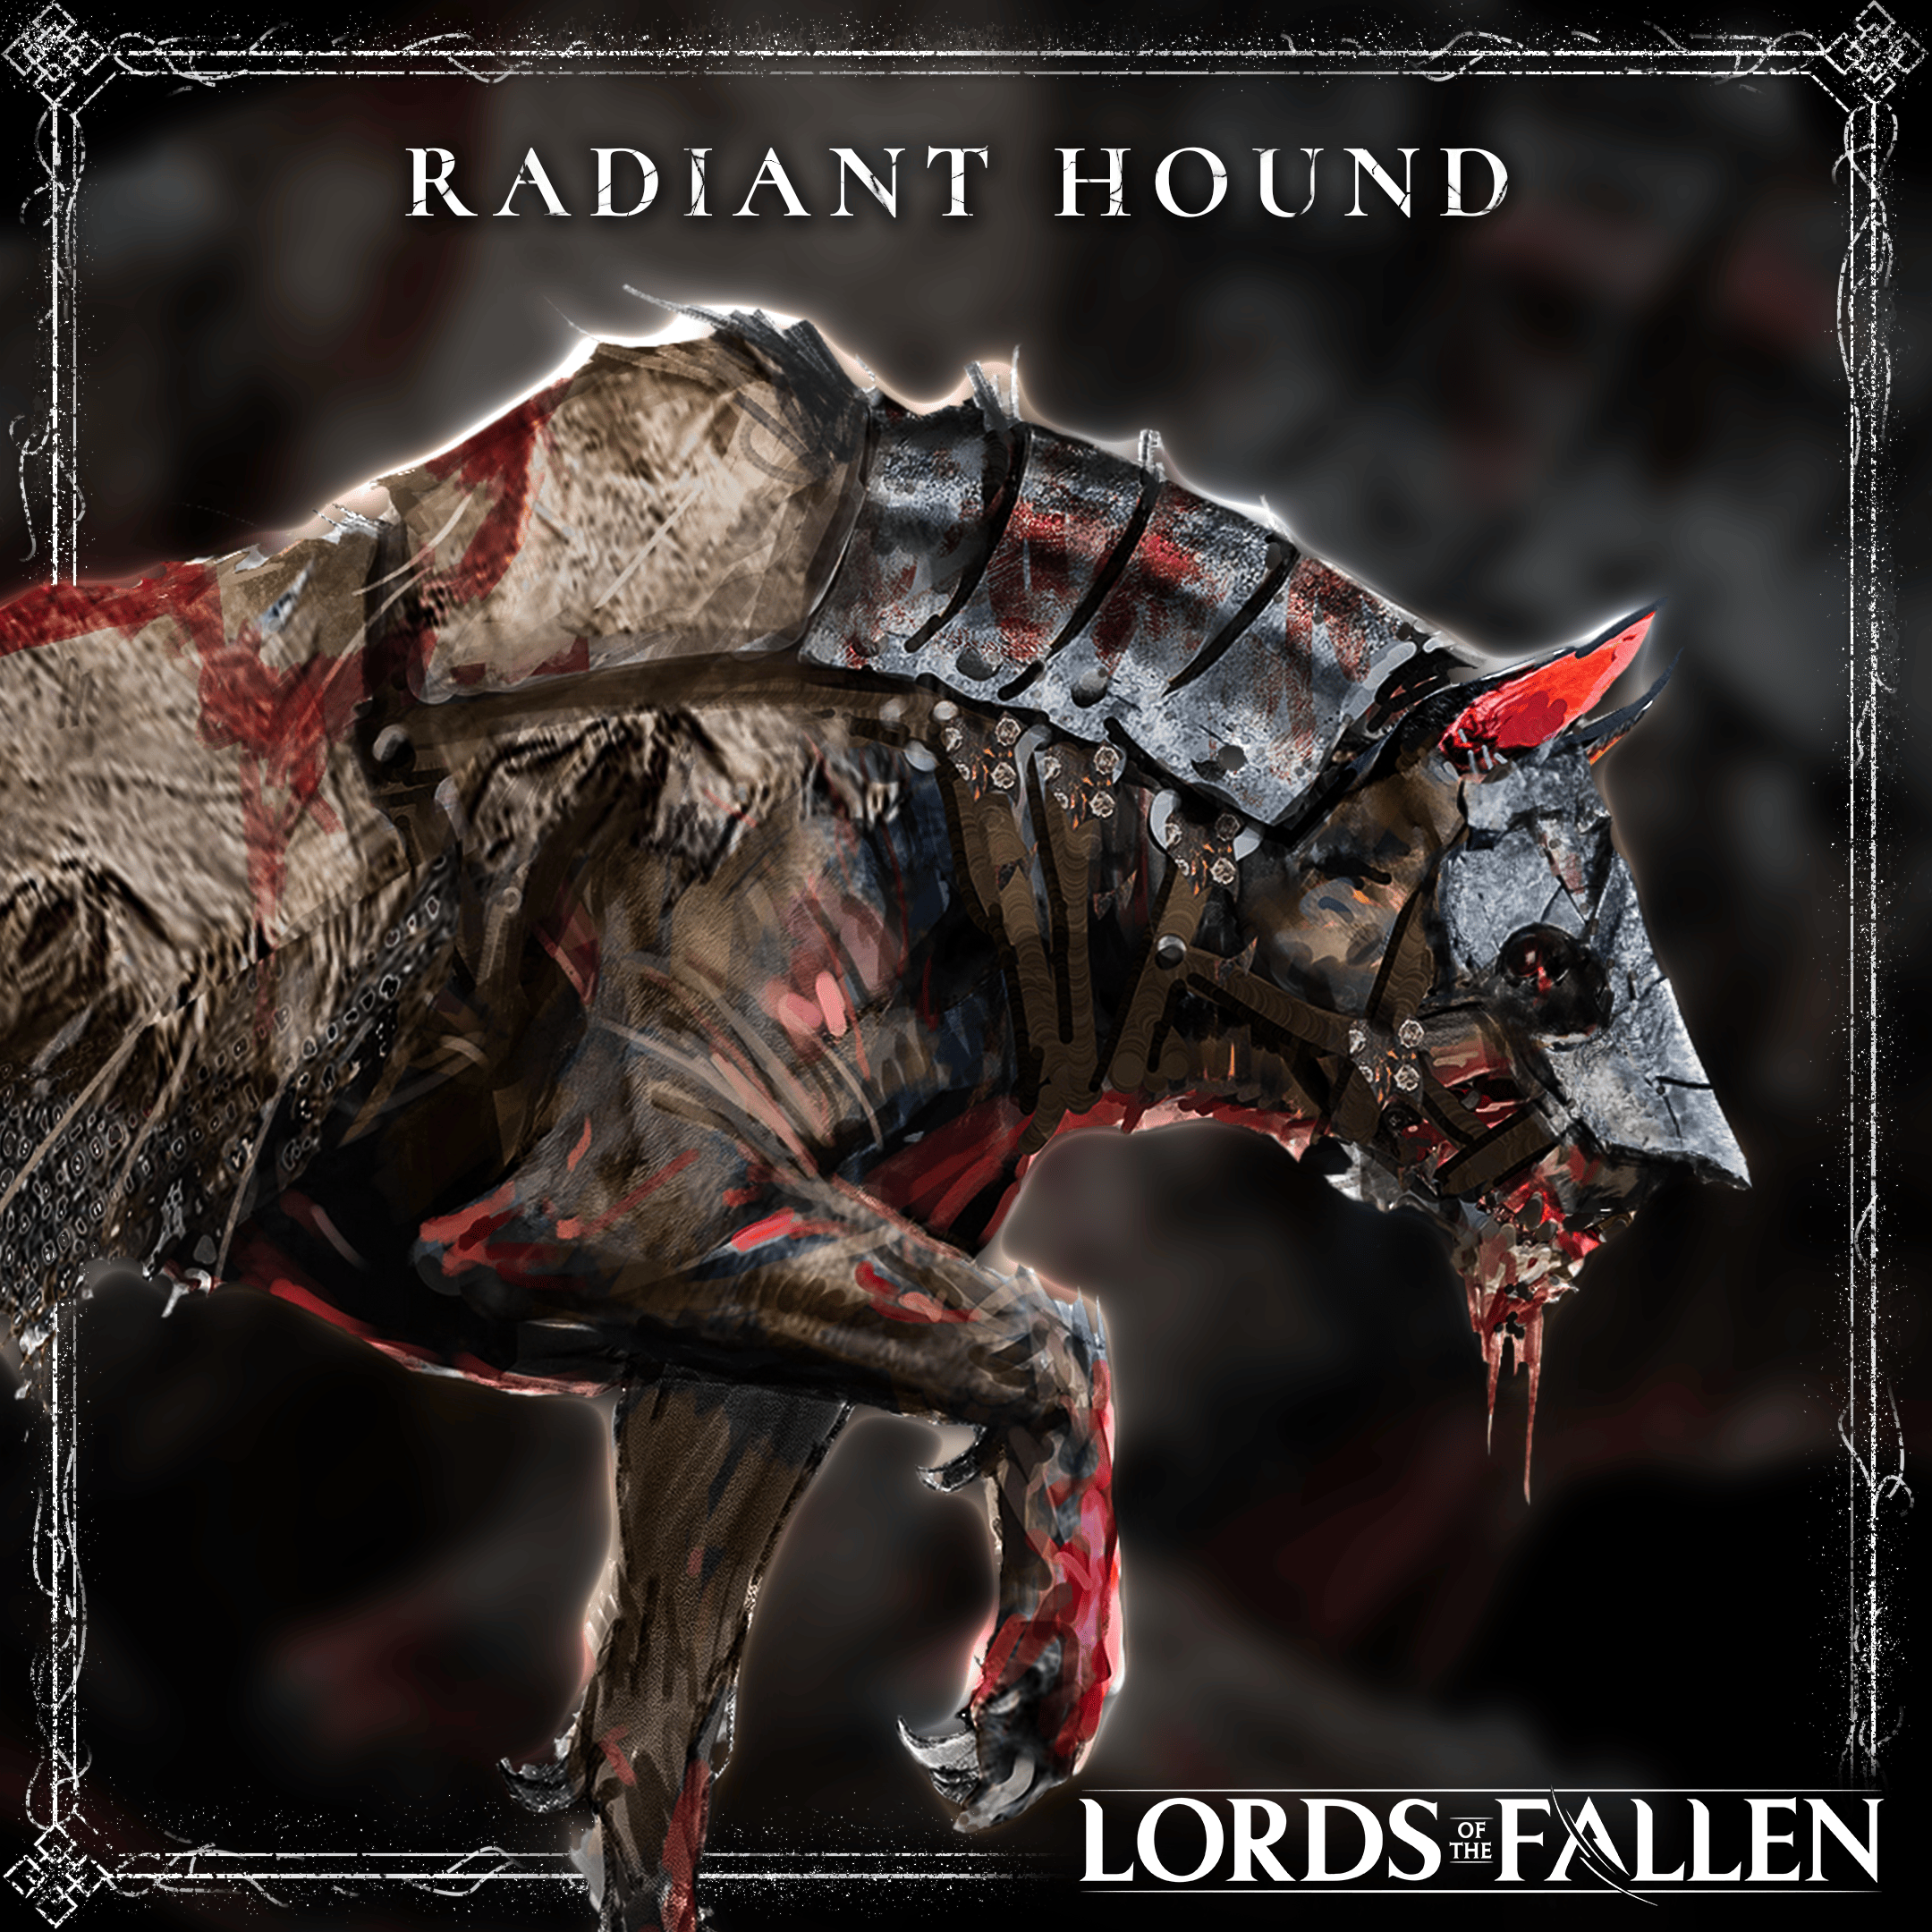 lords of the fallen radiant hound